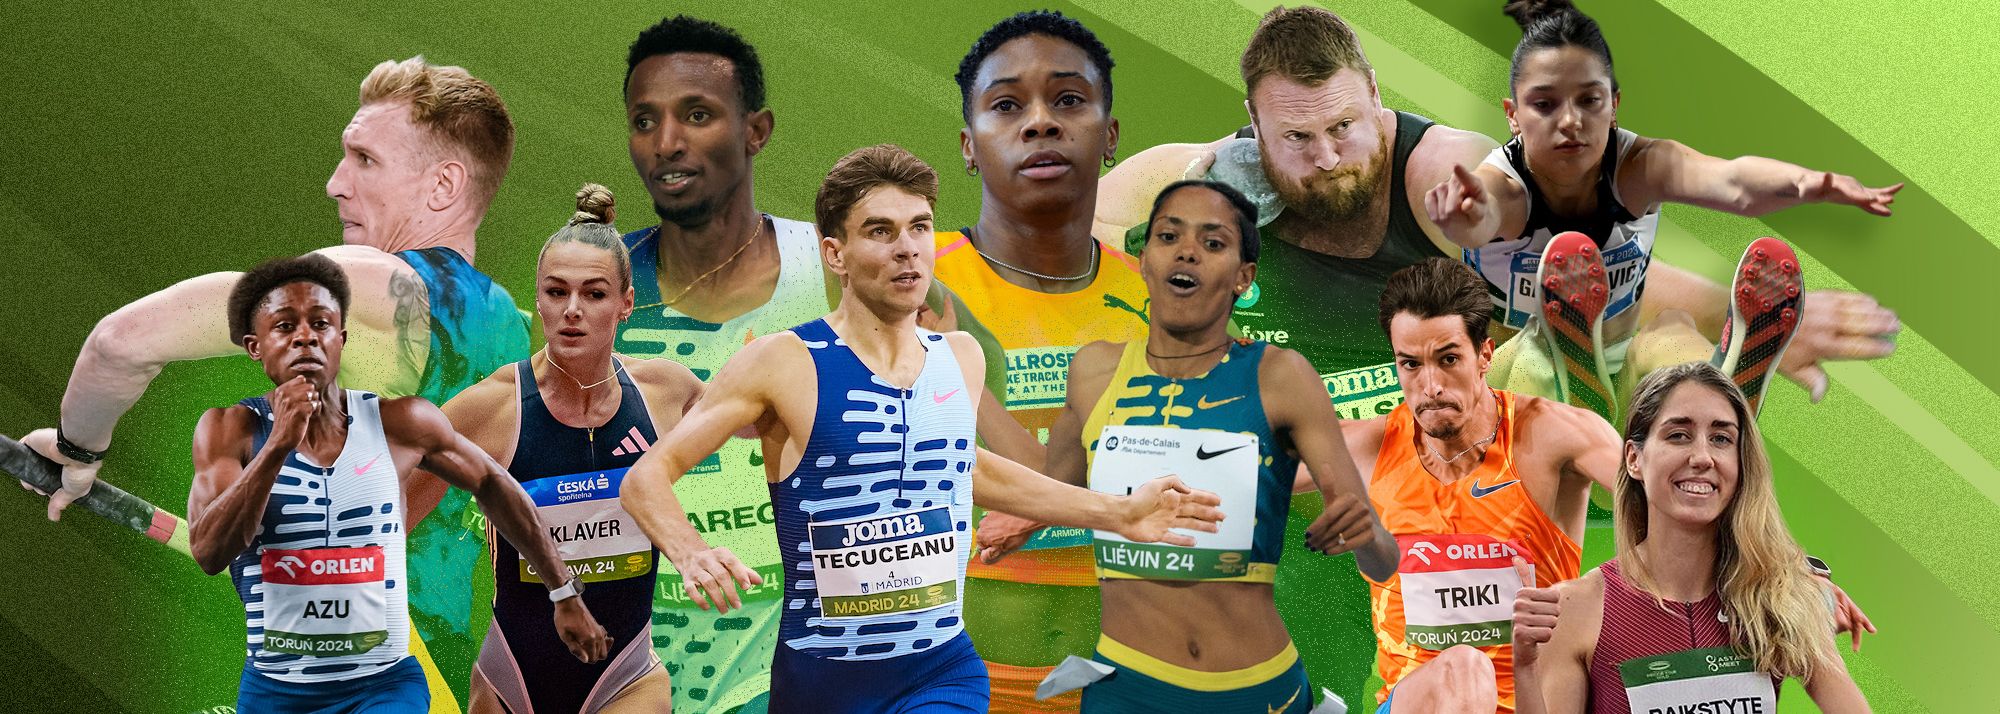 Another 11 athletes have secured wild card spots for the World Athletics Indoor Championships Glasgow 24